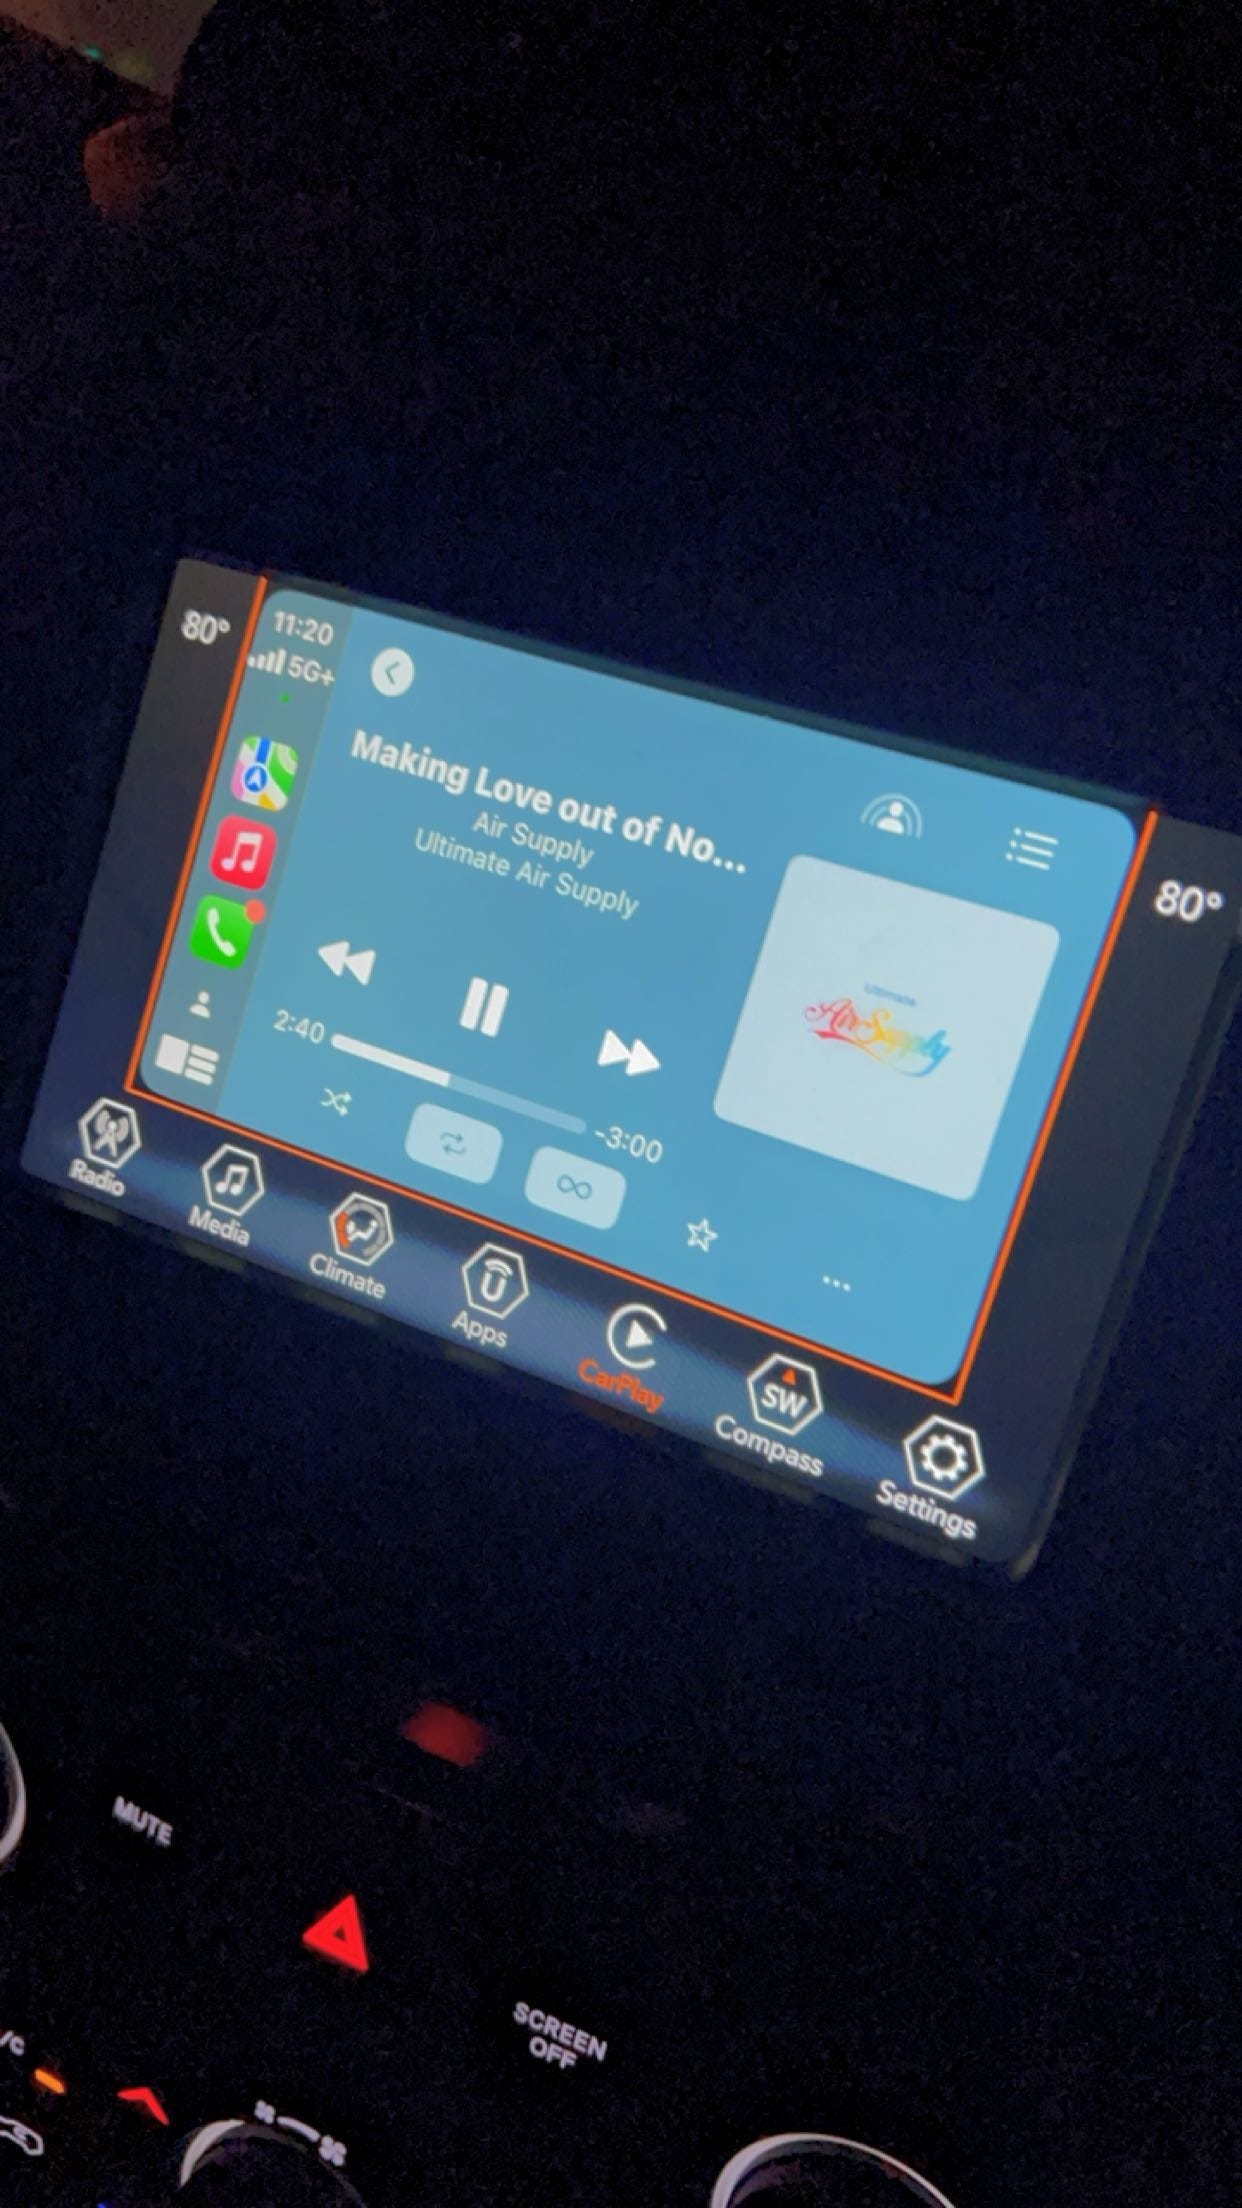 photo of andrea valdez's media screen on her car playing making love our of nothing at all by air supply